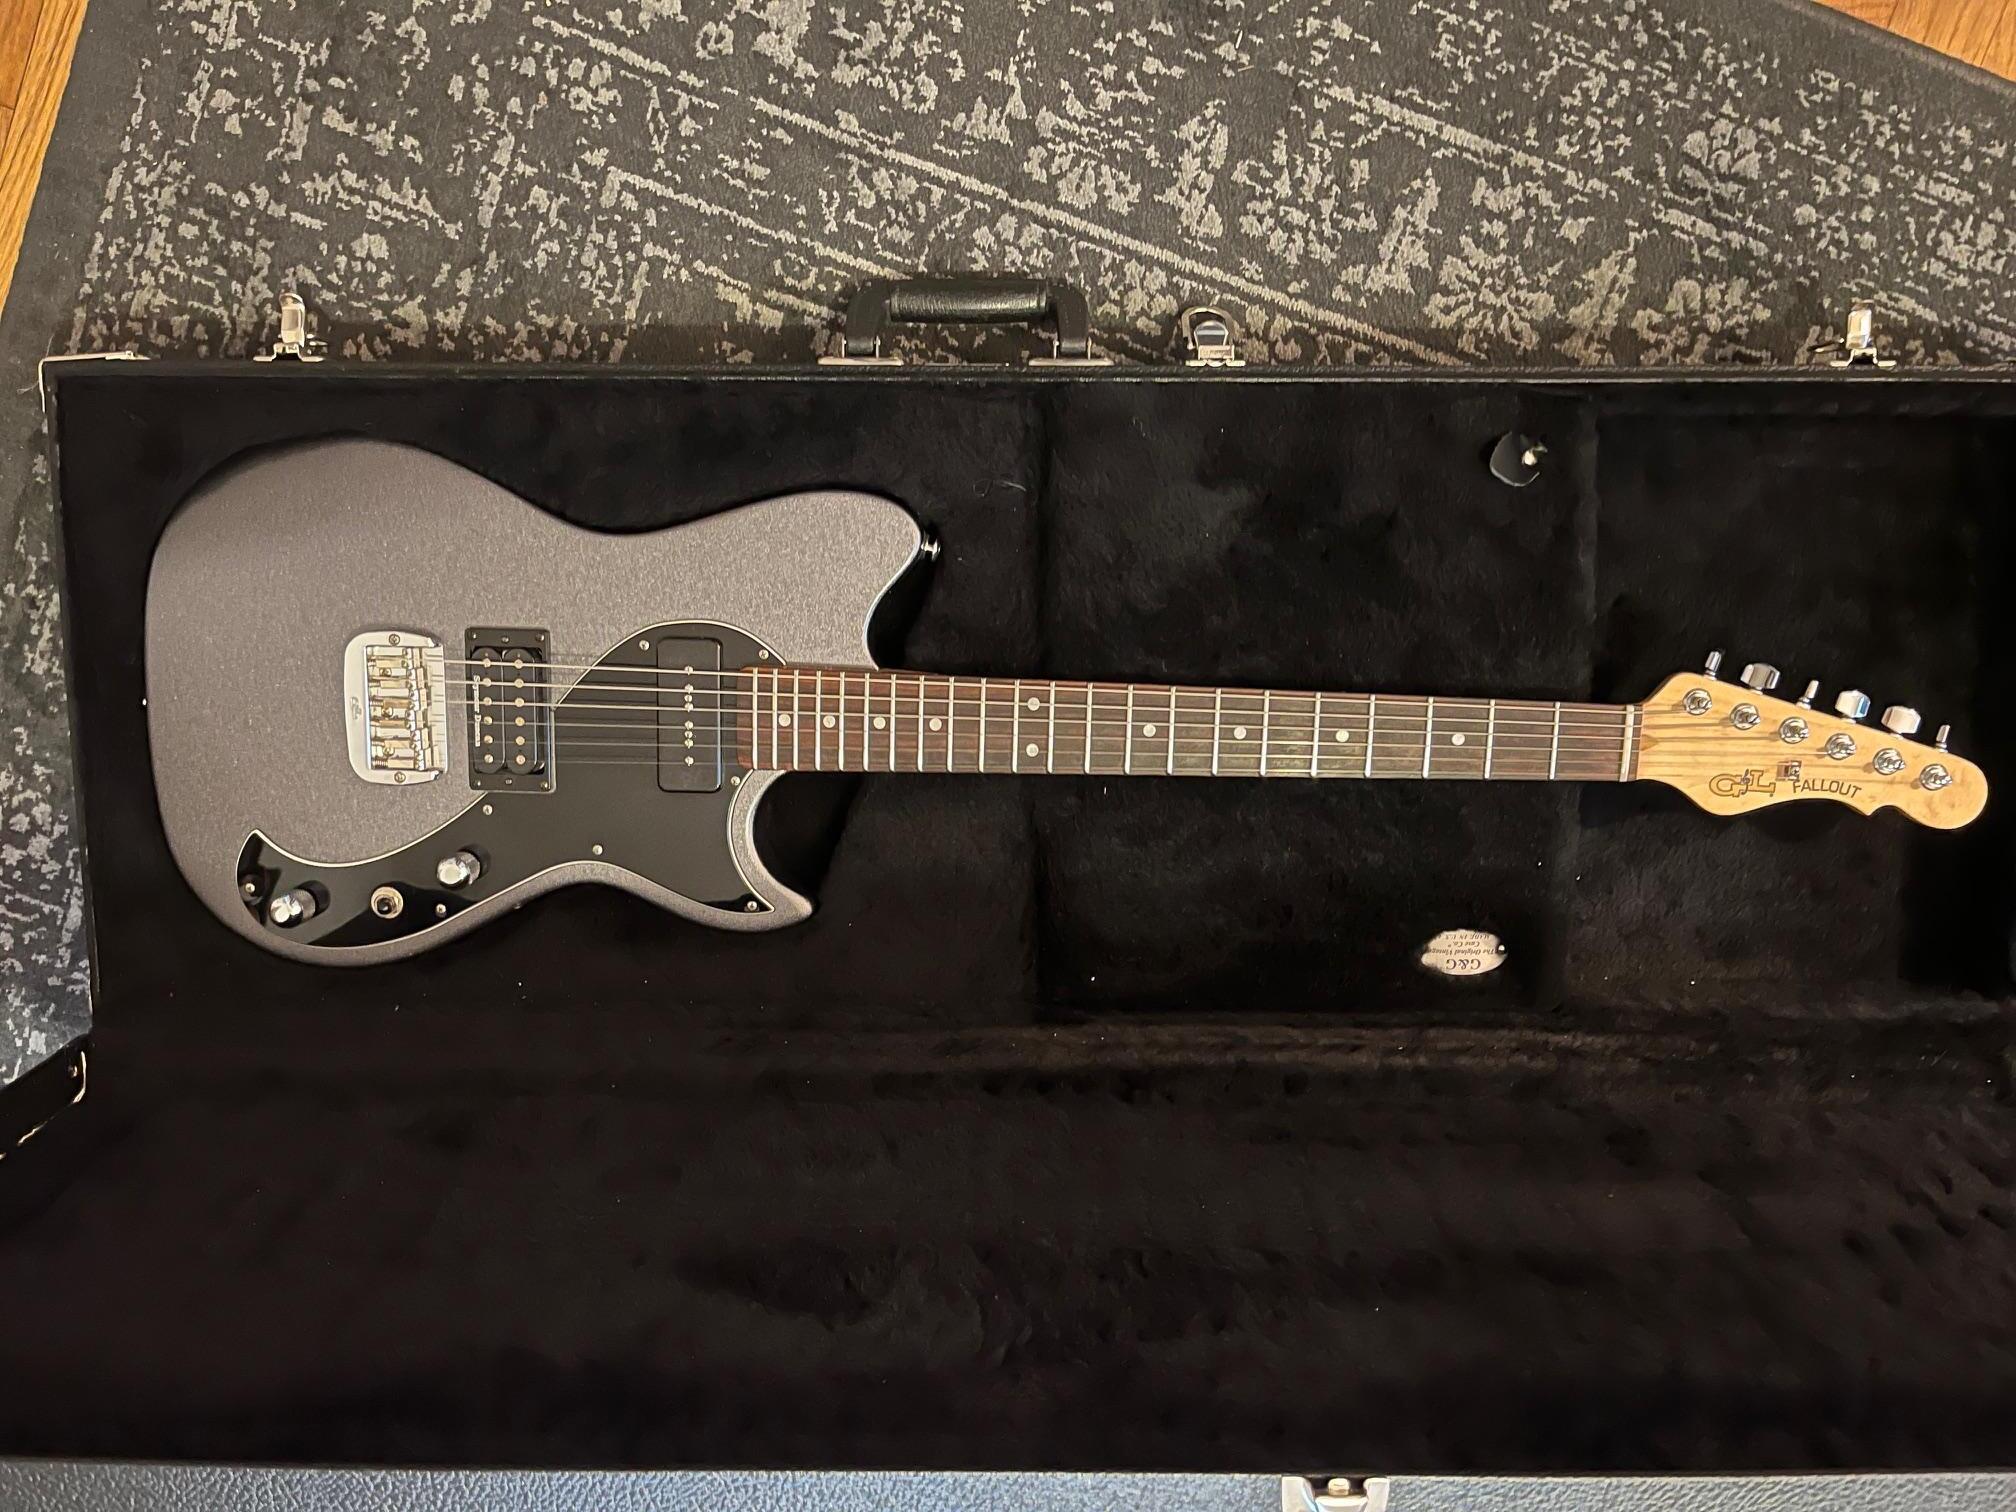 Used G&L USA Fallout 2013 - Graphite - Sweetwater's Gear Exchange